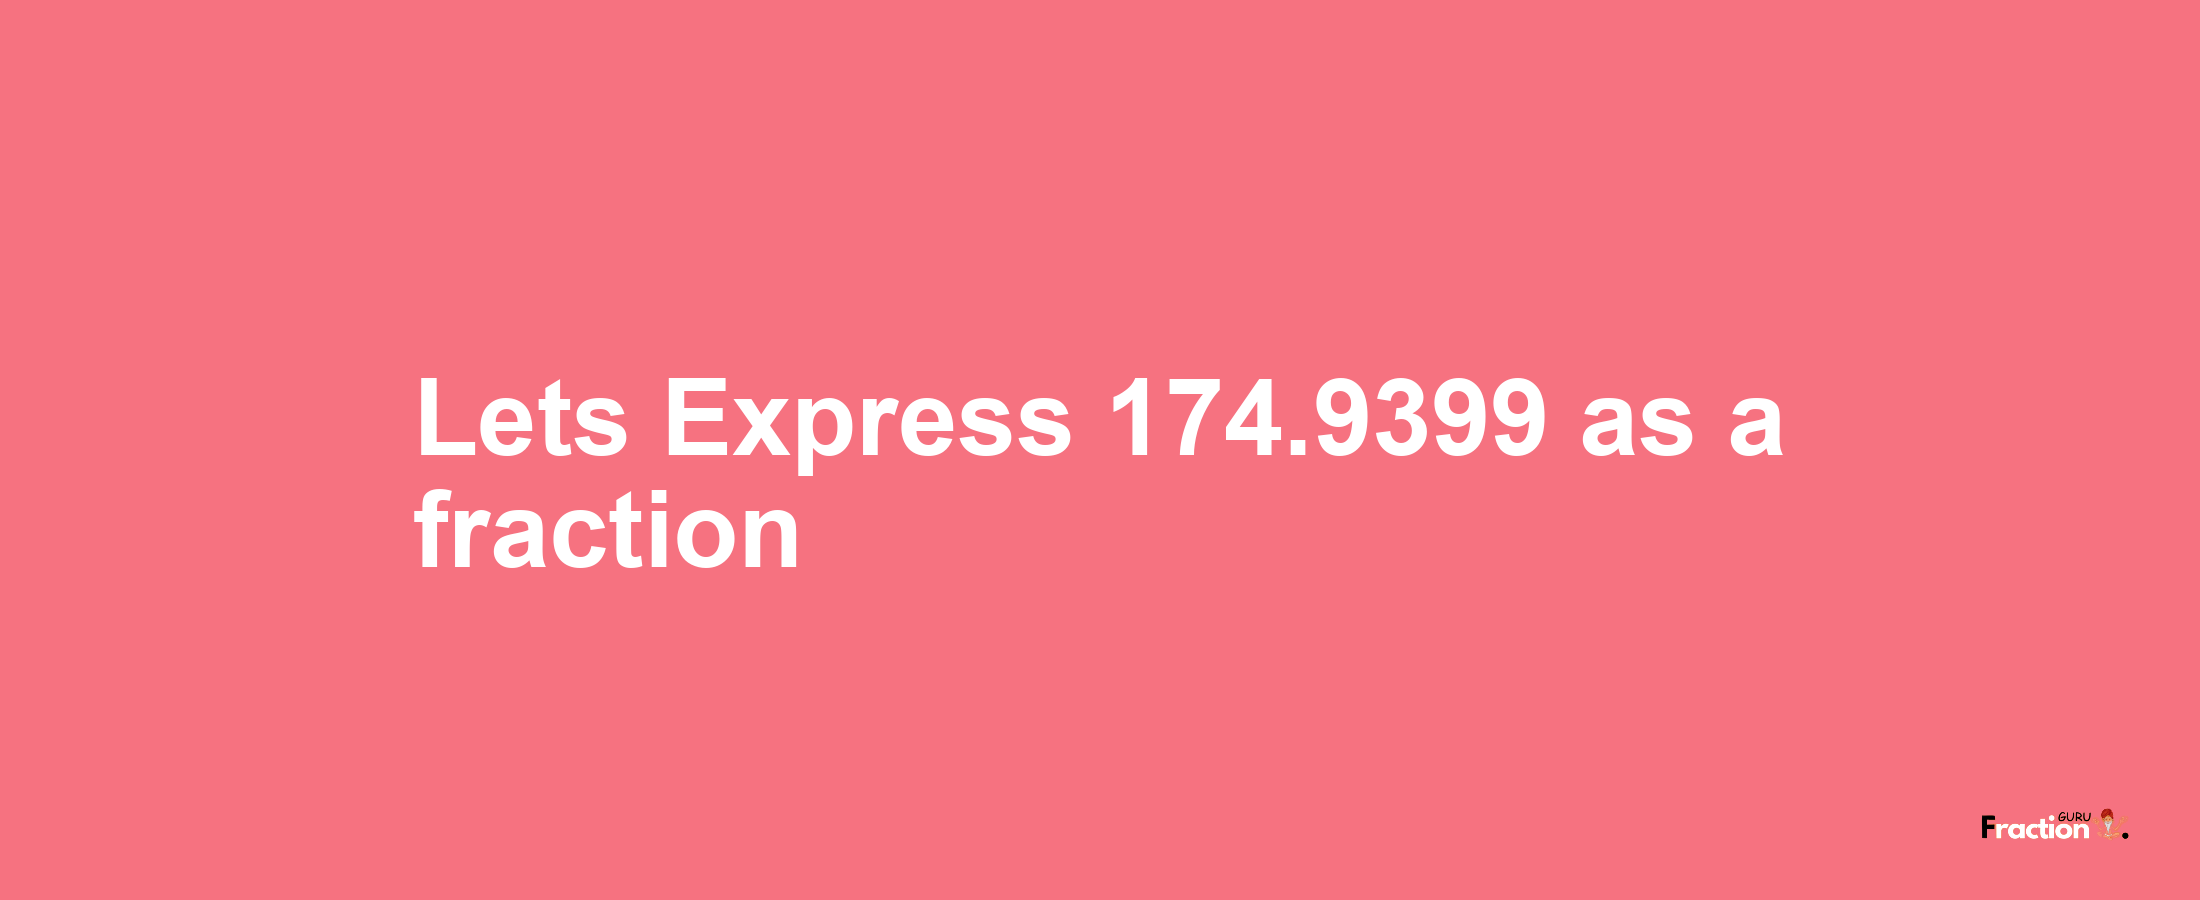 Lets Express 174.9399 as afraction